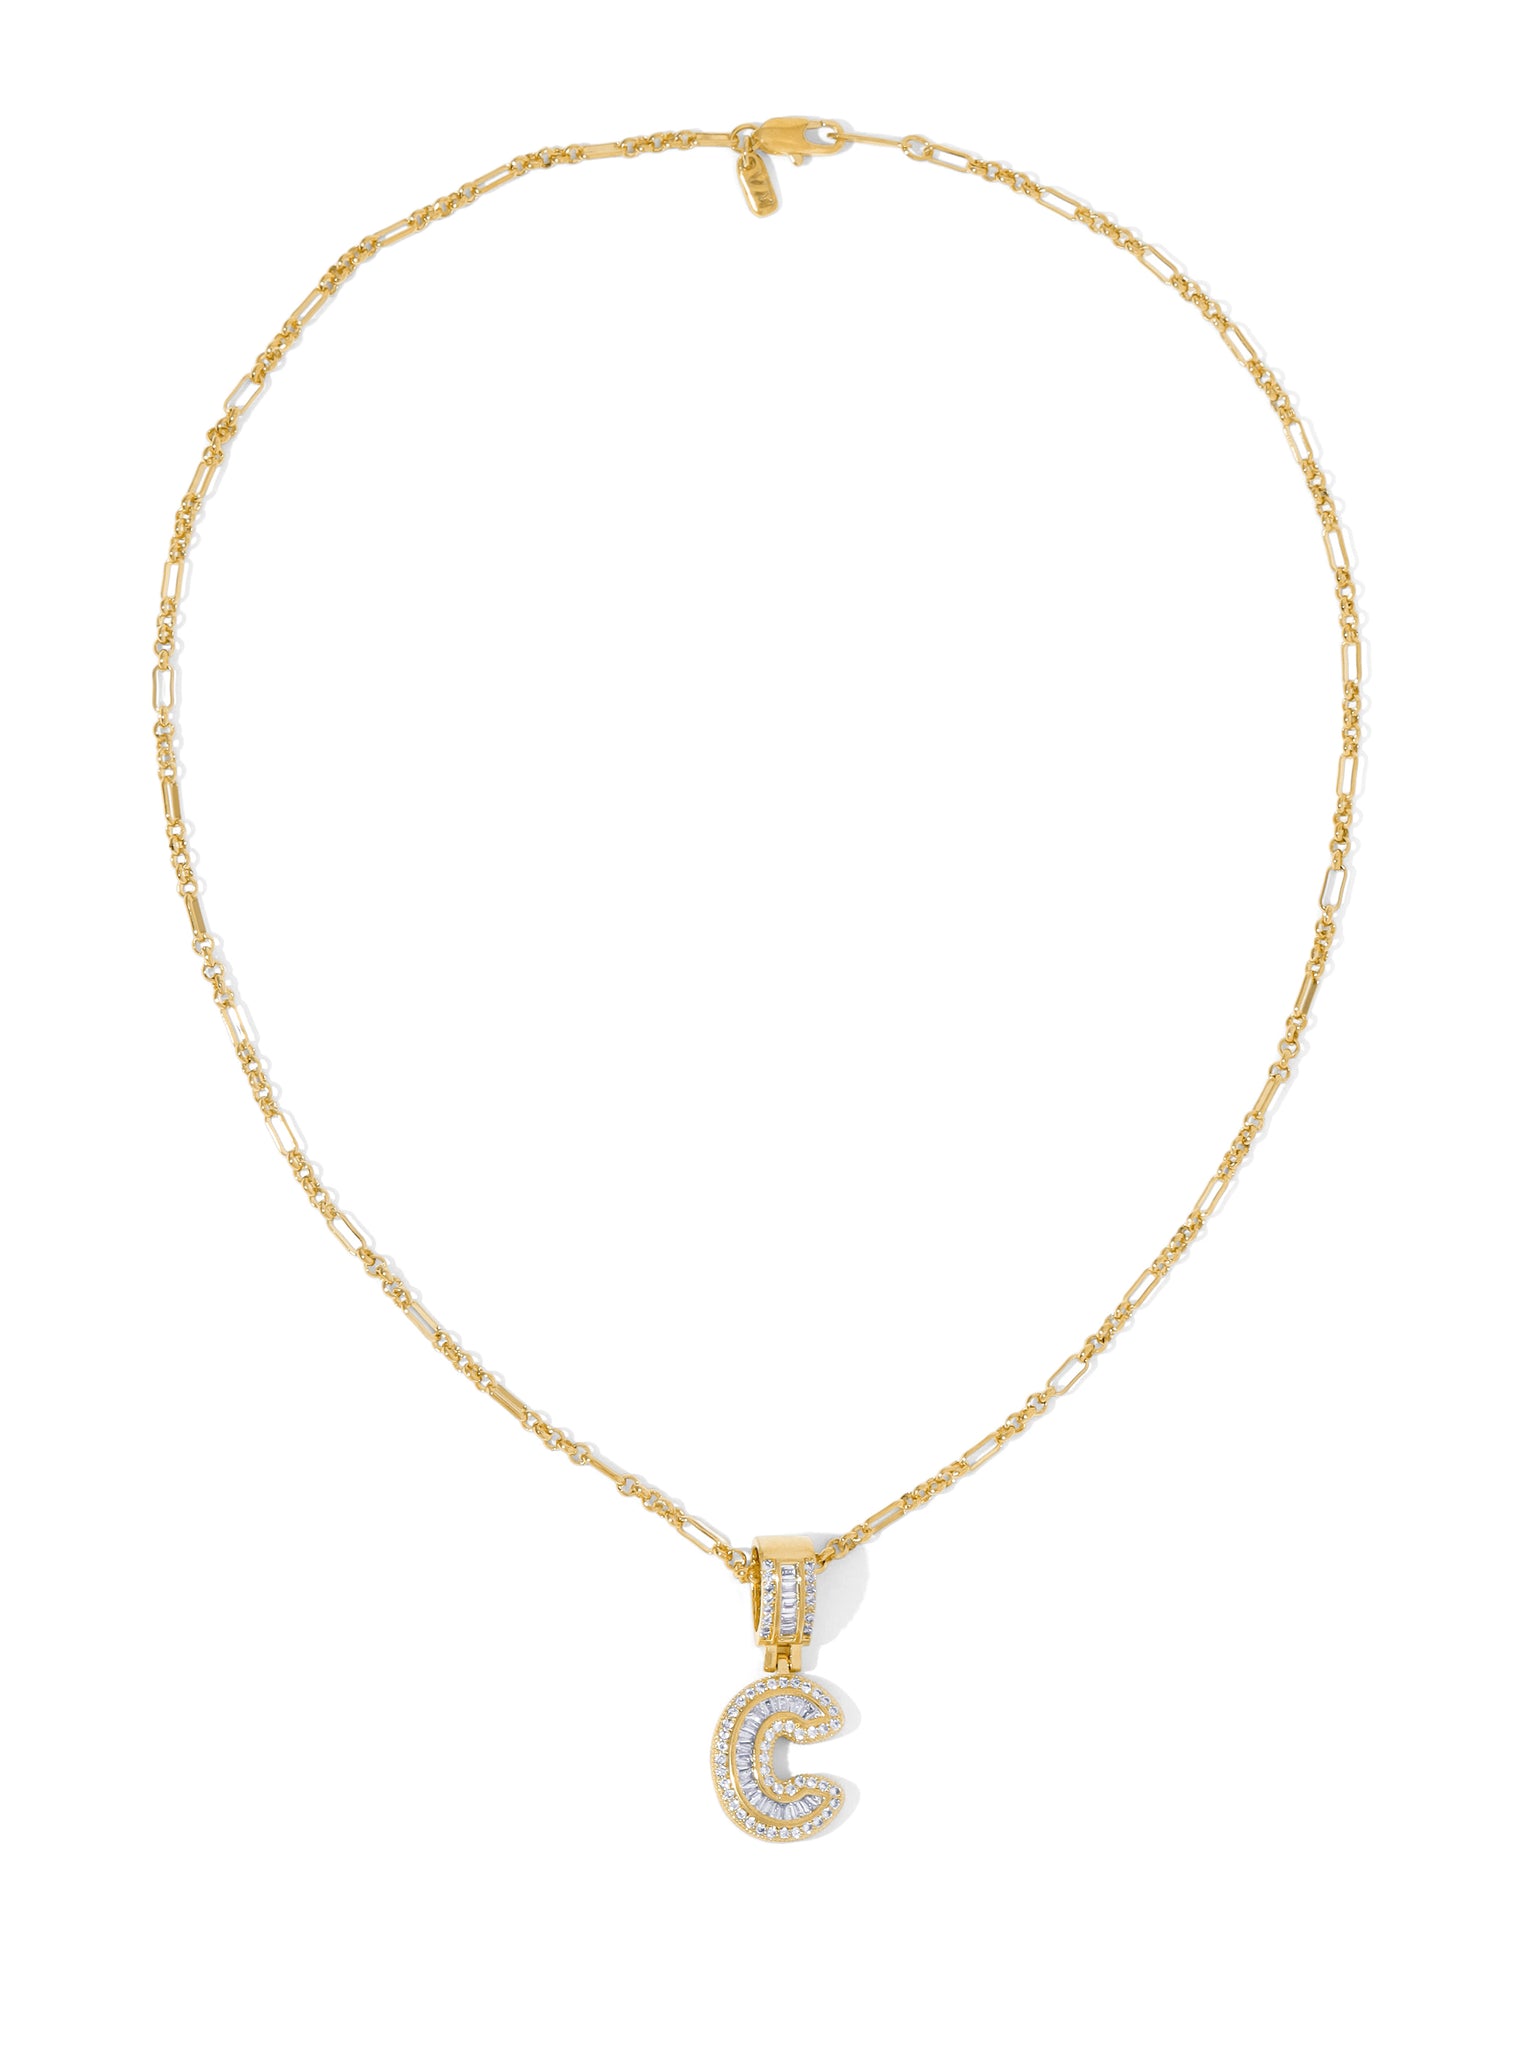 The Evita Initial Necklace